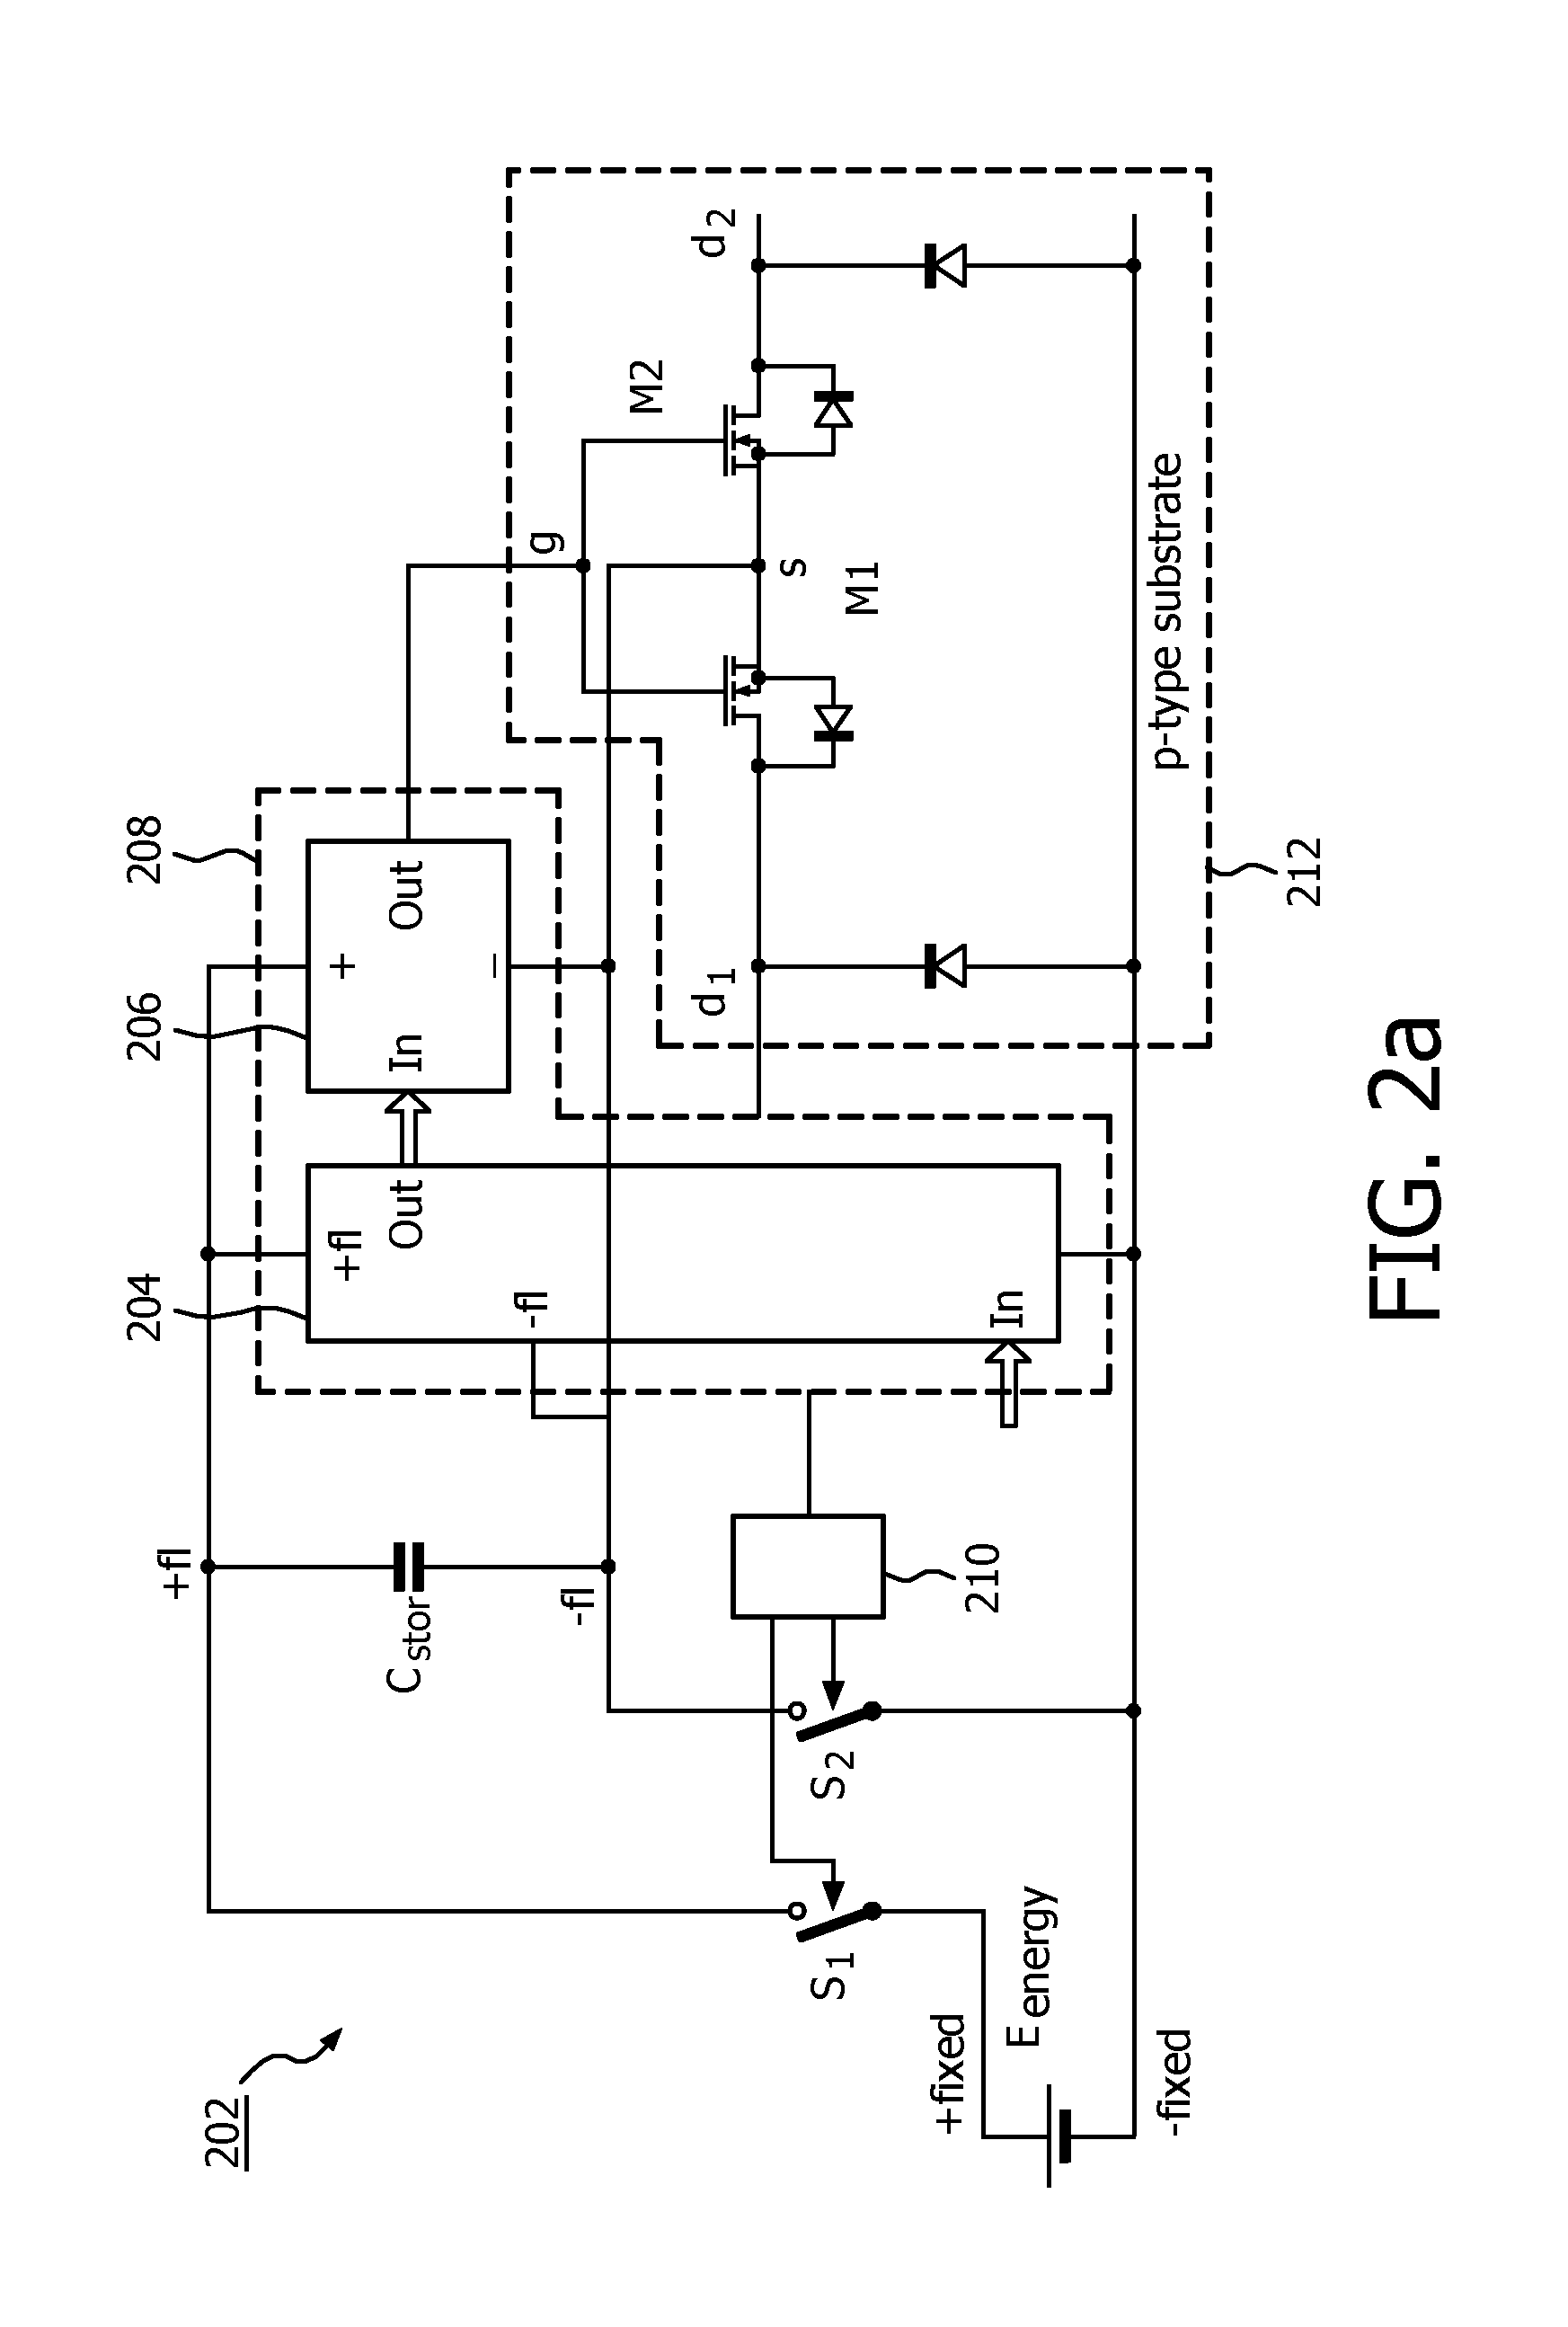 Control Circuitry And Method For Controlling A Bi-Directional Switch System, A Bi-Directional Switch, A Switching Matrix And A Medical Stimulator